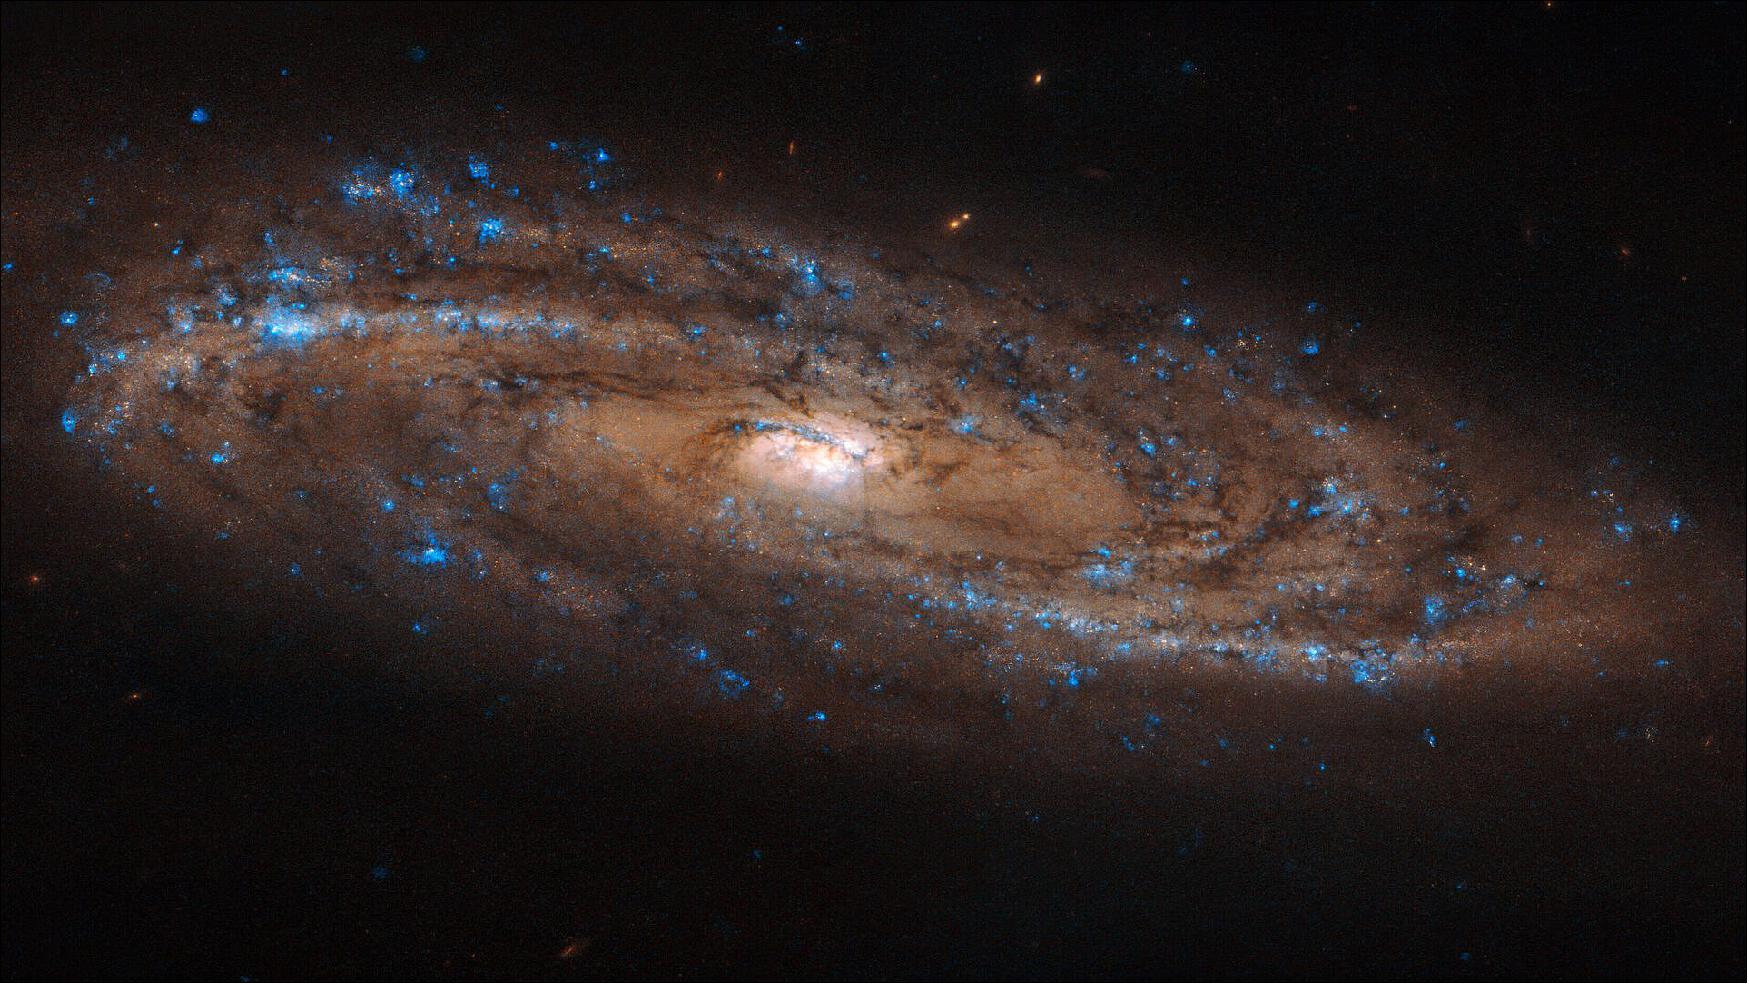 Figure 62: Like so many of the stunning images of galaxies we enjoy today, this image was captured by Hubble’s Advanced Camera for Surveys (ACS). This remarkable instrument was installed in 2002, and, with some servicing over the years by intrepid astronauts, is still going strong. You can access many of the stunning images captured by the ACS here, featuring objects from out-of-this-world spiral galaxies to dark, imposing nebulae, bizarre cosmic phenomena, and sparkling clusters made up of thousands upon thousands of stars (image credit: ESA/Hubble & NASA, L. Ho; CC BY 4.0)